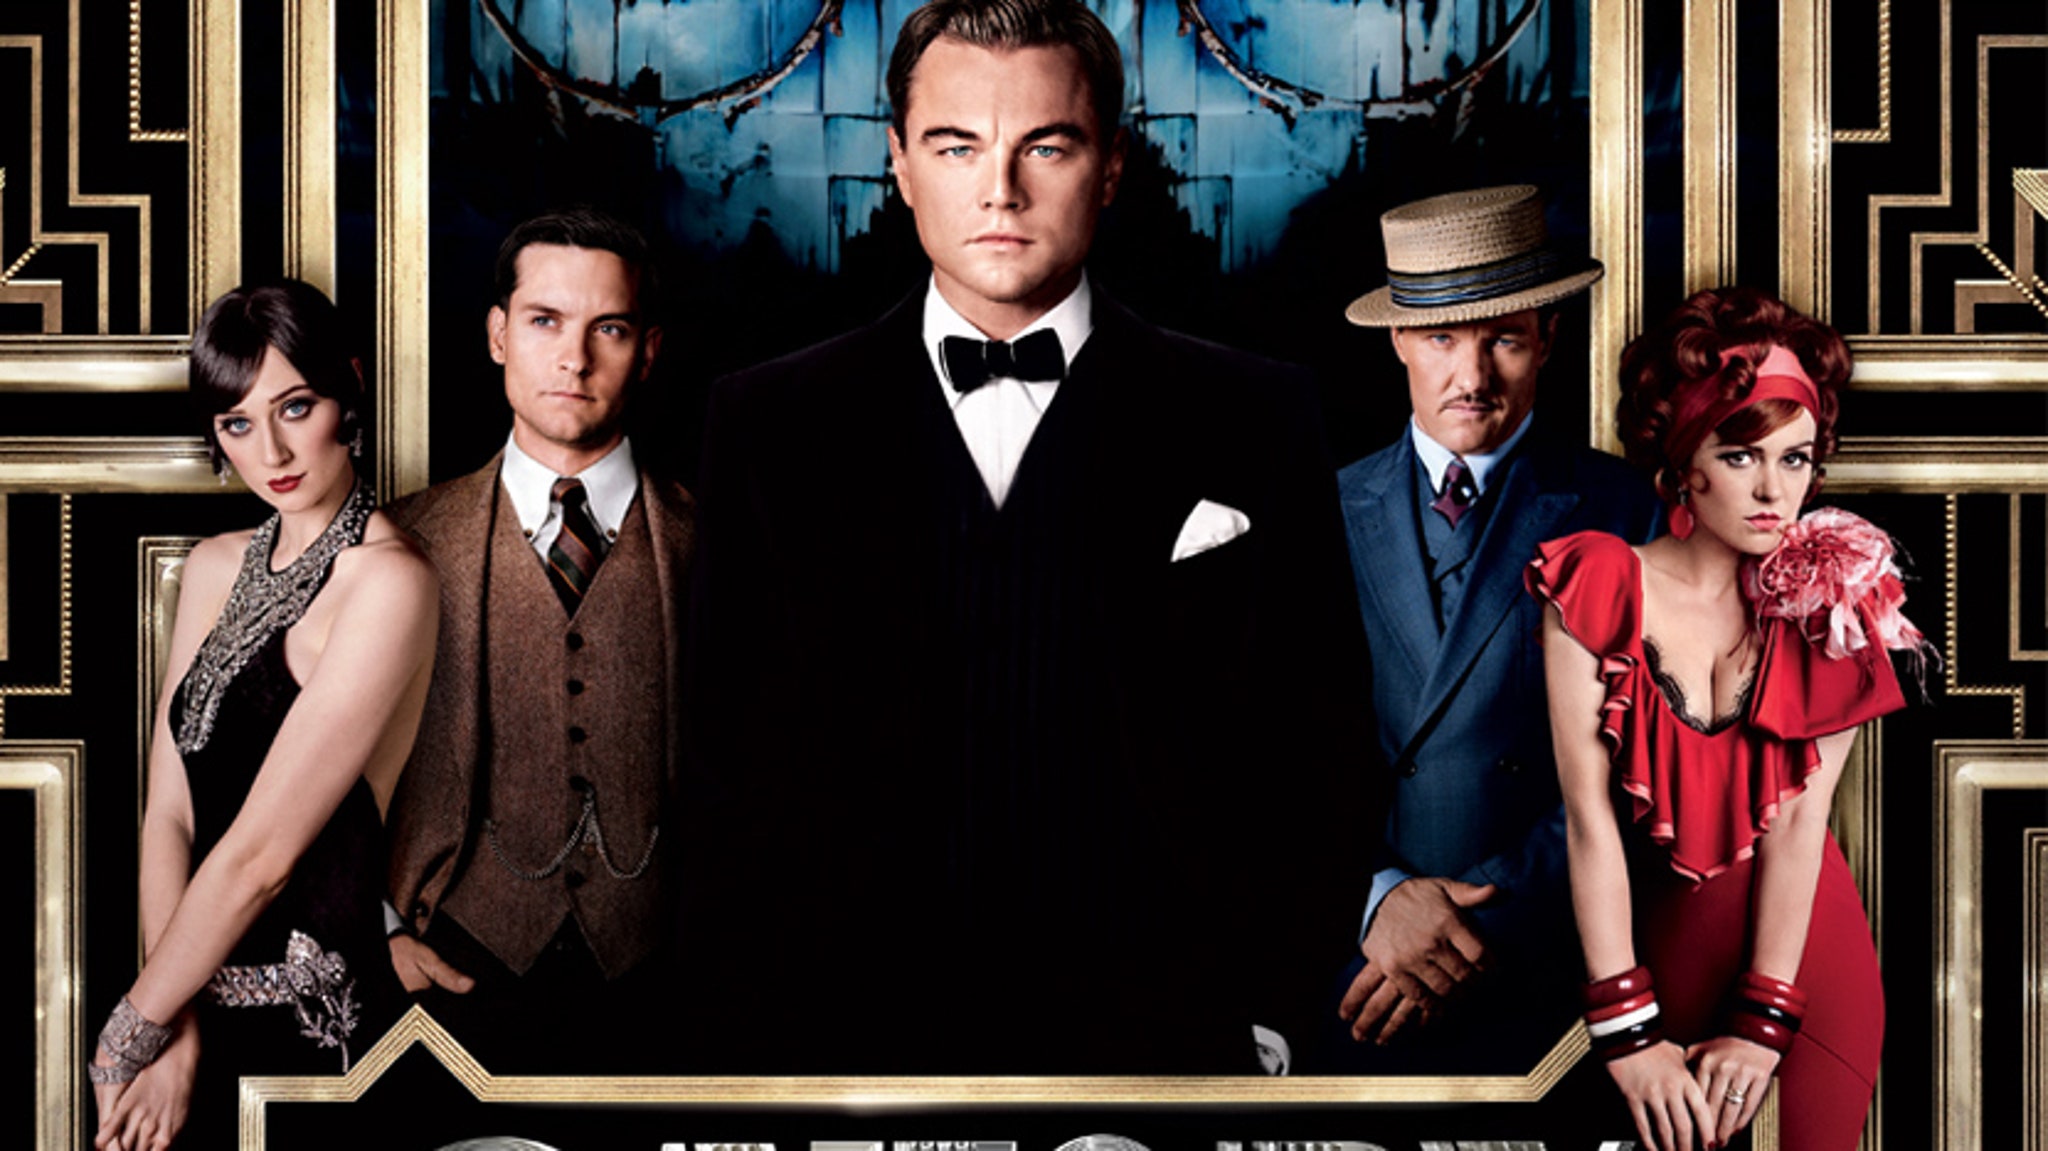 "The Great Gatsby" Review -- Is It Really That "Great"? - Where Can I Watch The Great Gatsby Free